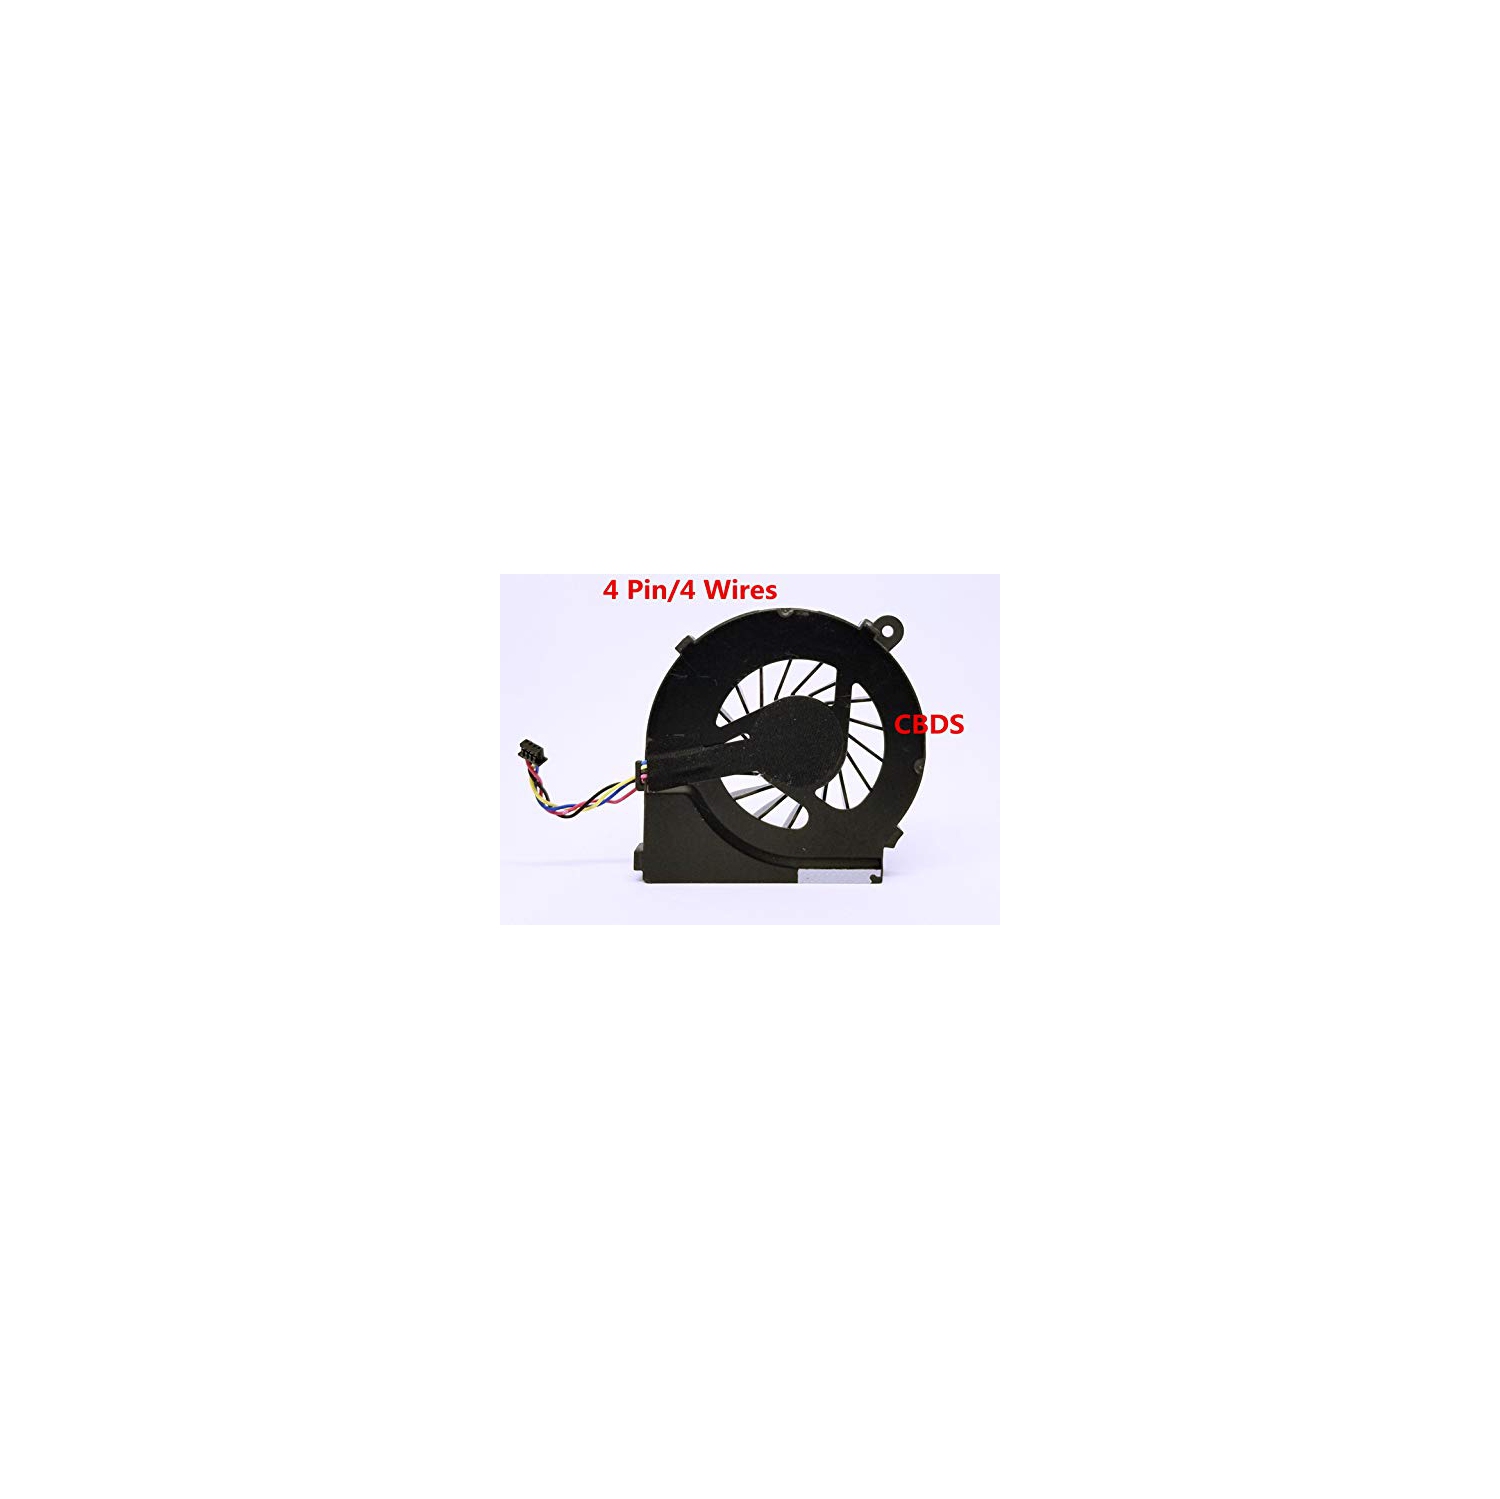 (CBDS) Replacement Parts 4 Pin 4 Wires CPU Cooling Fan - Compatible with HP Pavilion 4 Pin 4 Wires G6 G6-1000 G6-1100